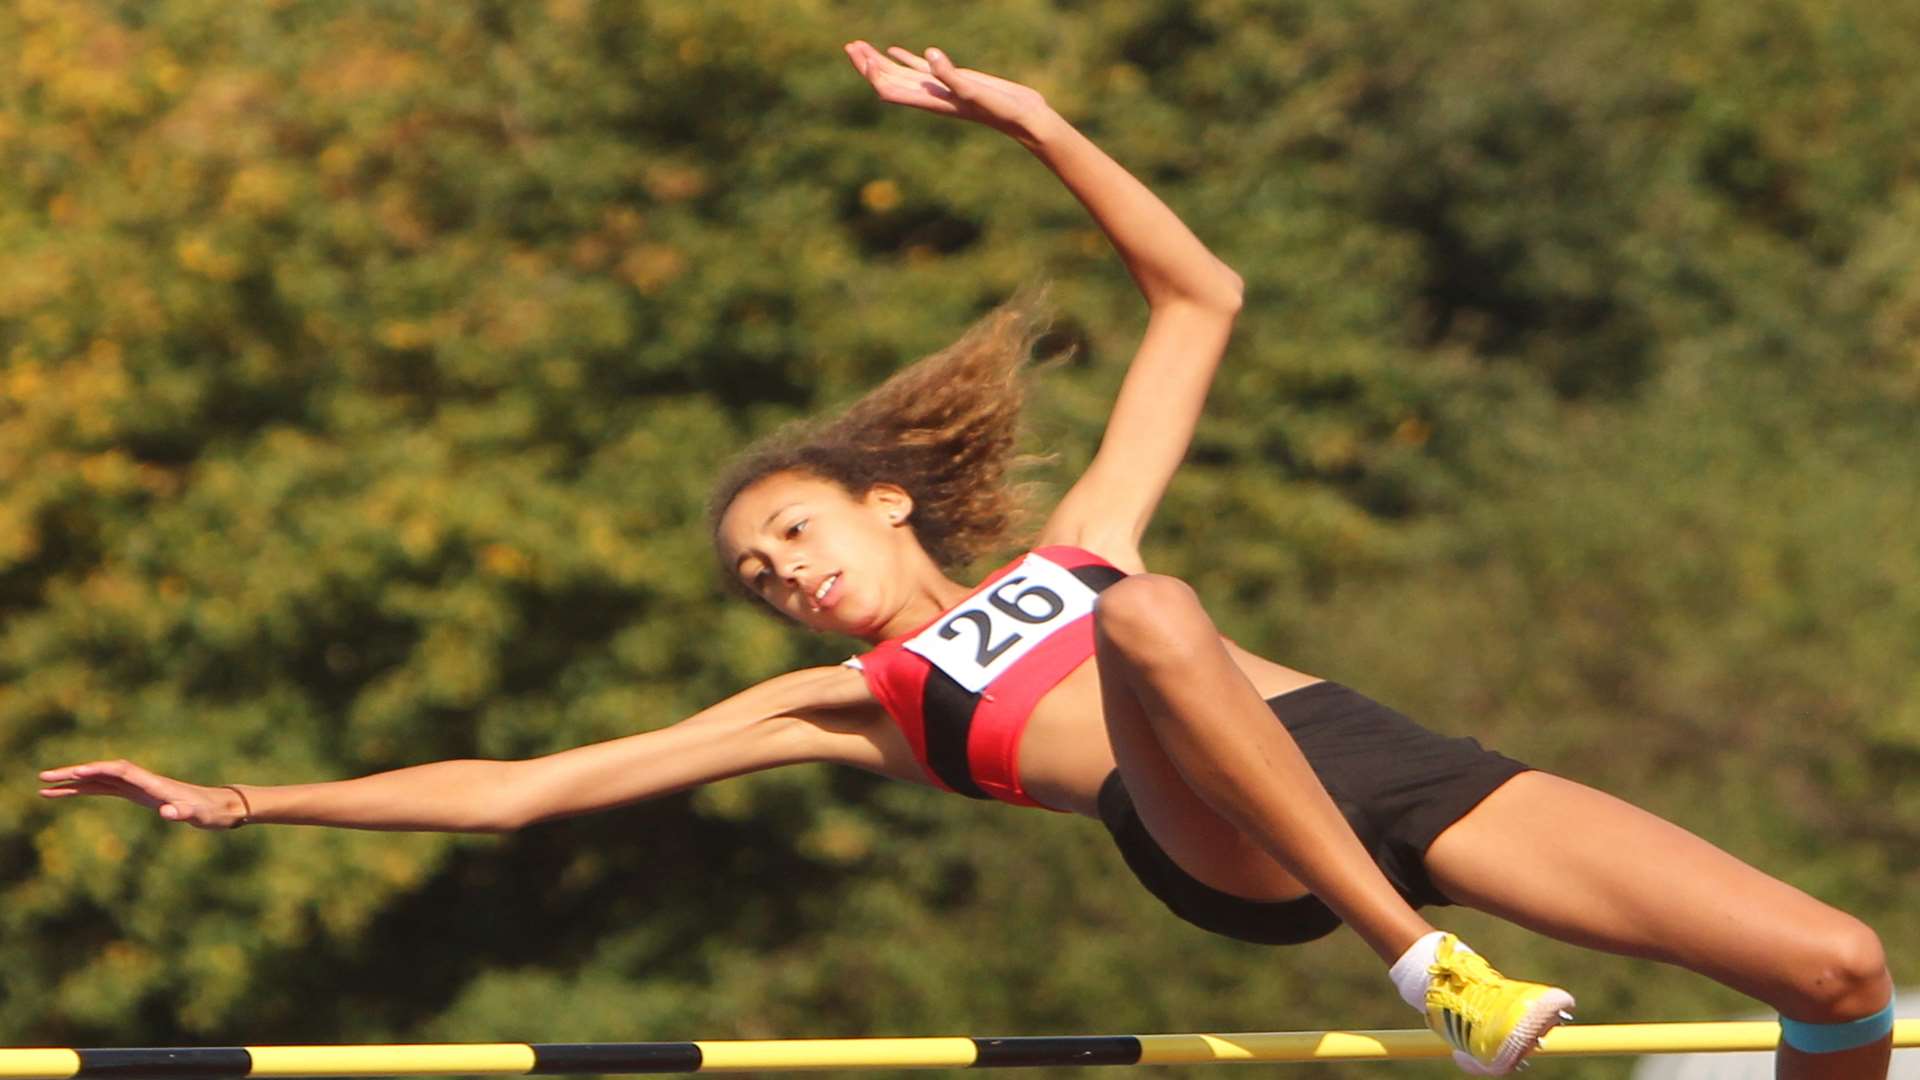 Jade Oni was among the winners with high jump gold at the English Schools Championships Picture: Sarah Jane Smith